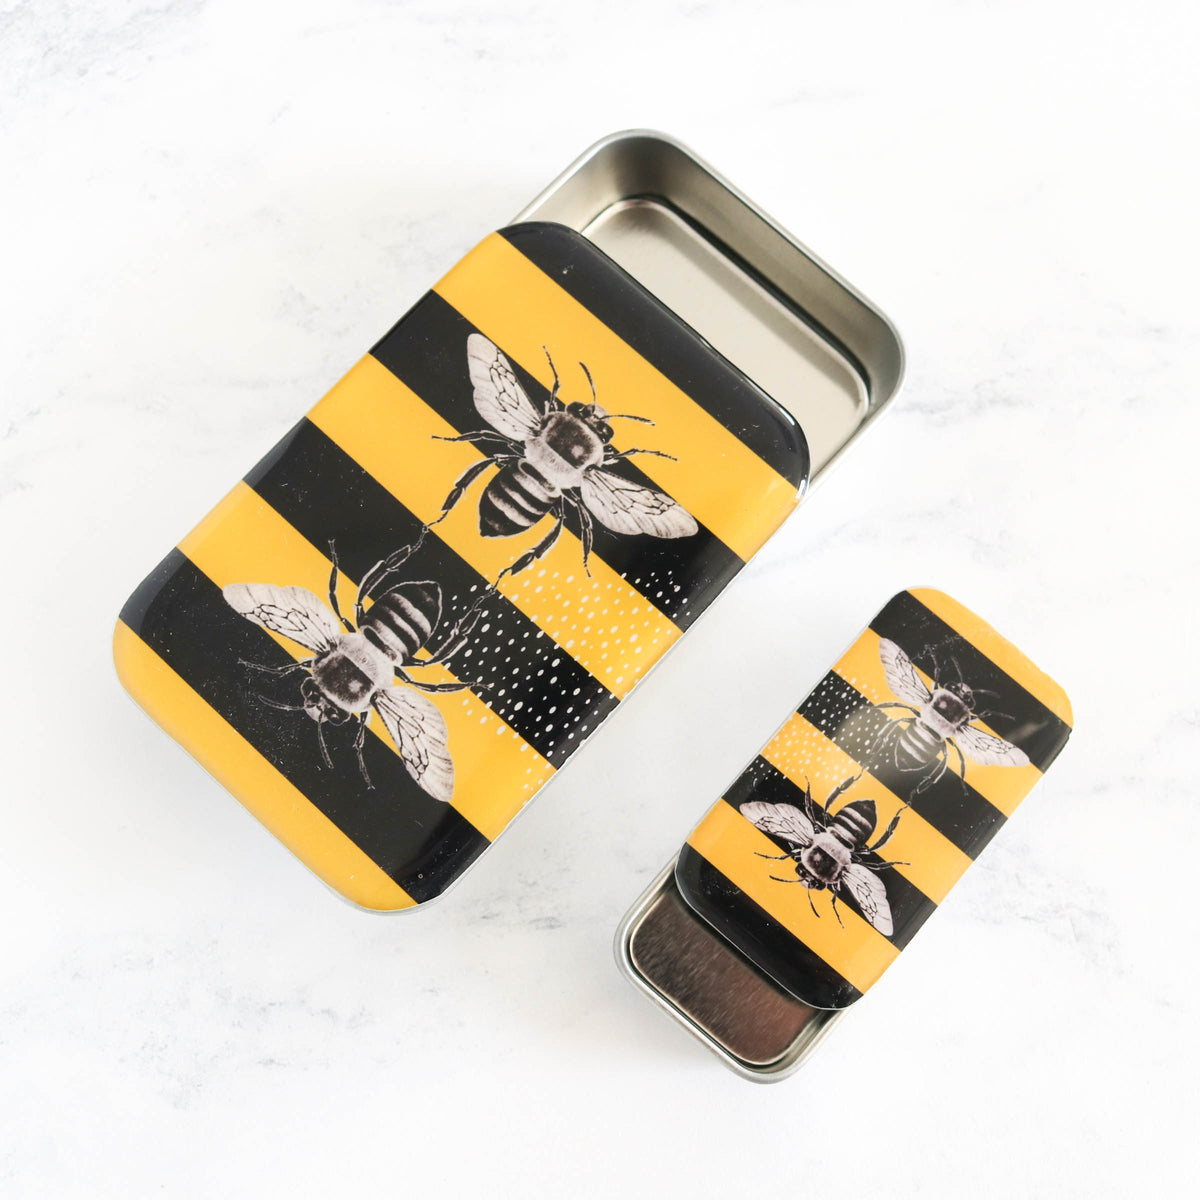 Vintage-Inspired Storage and Notions Tins - Bees